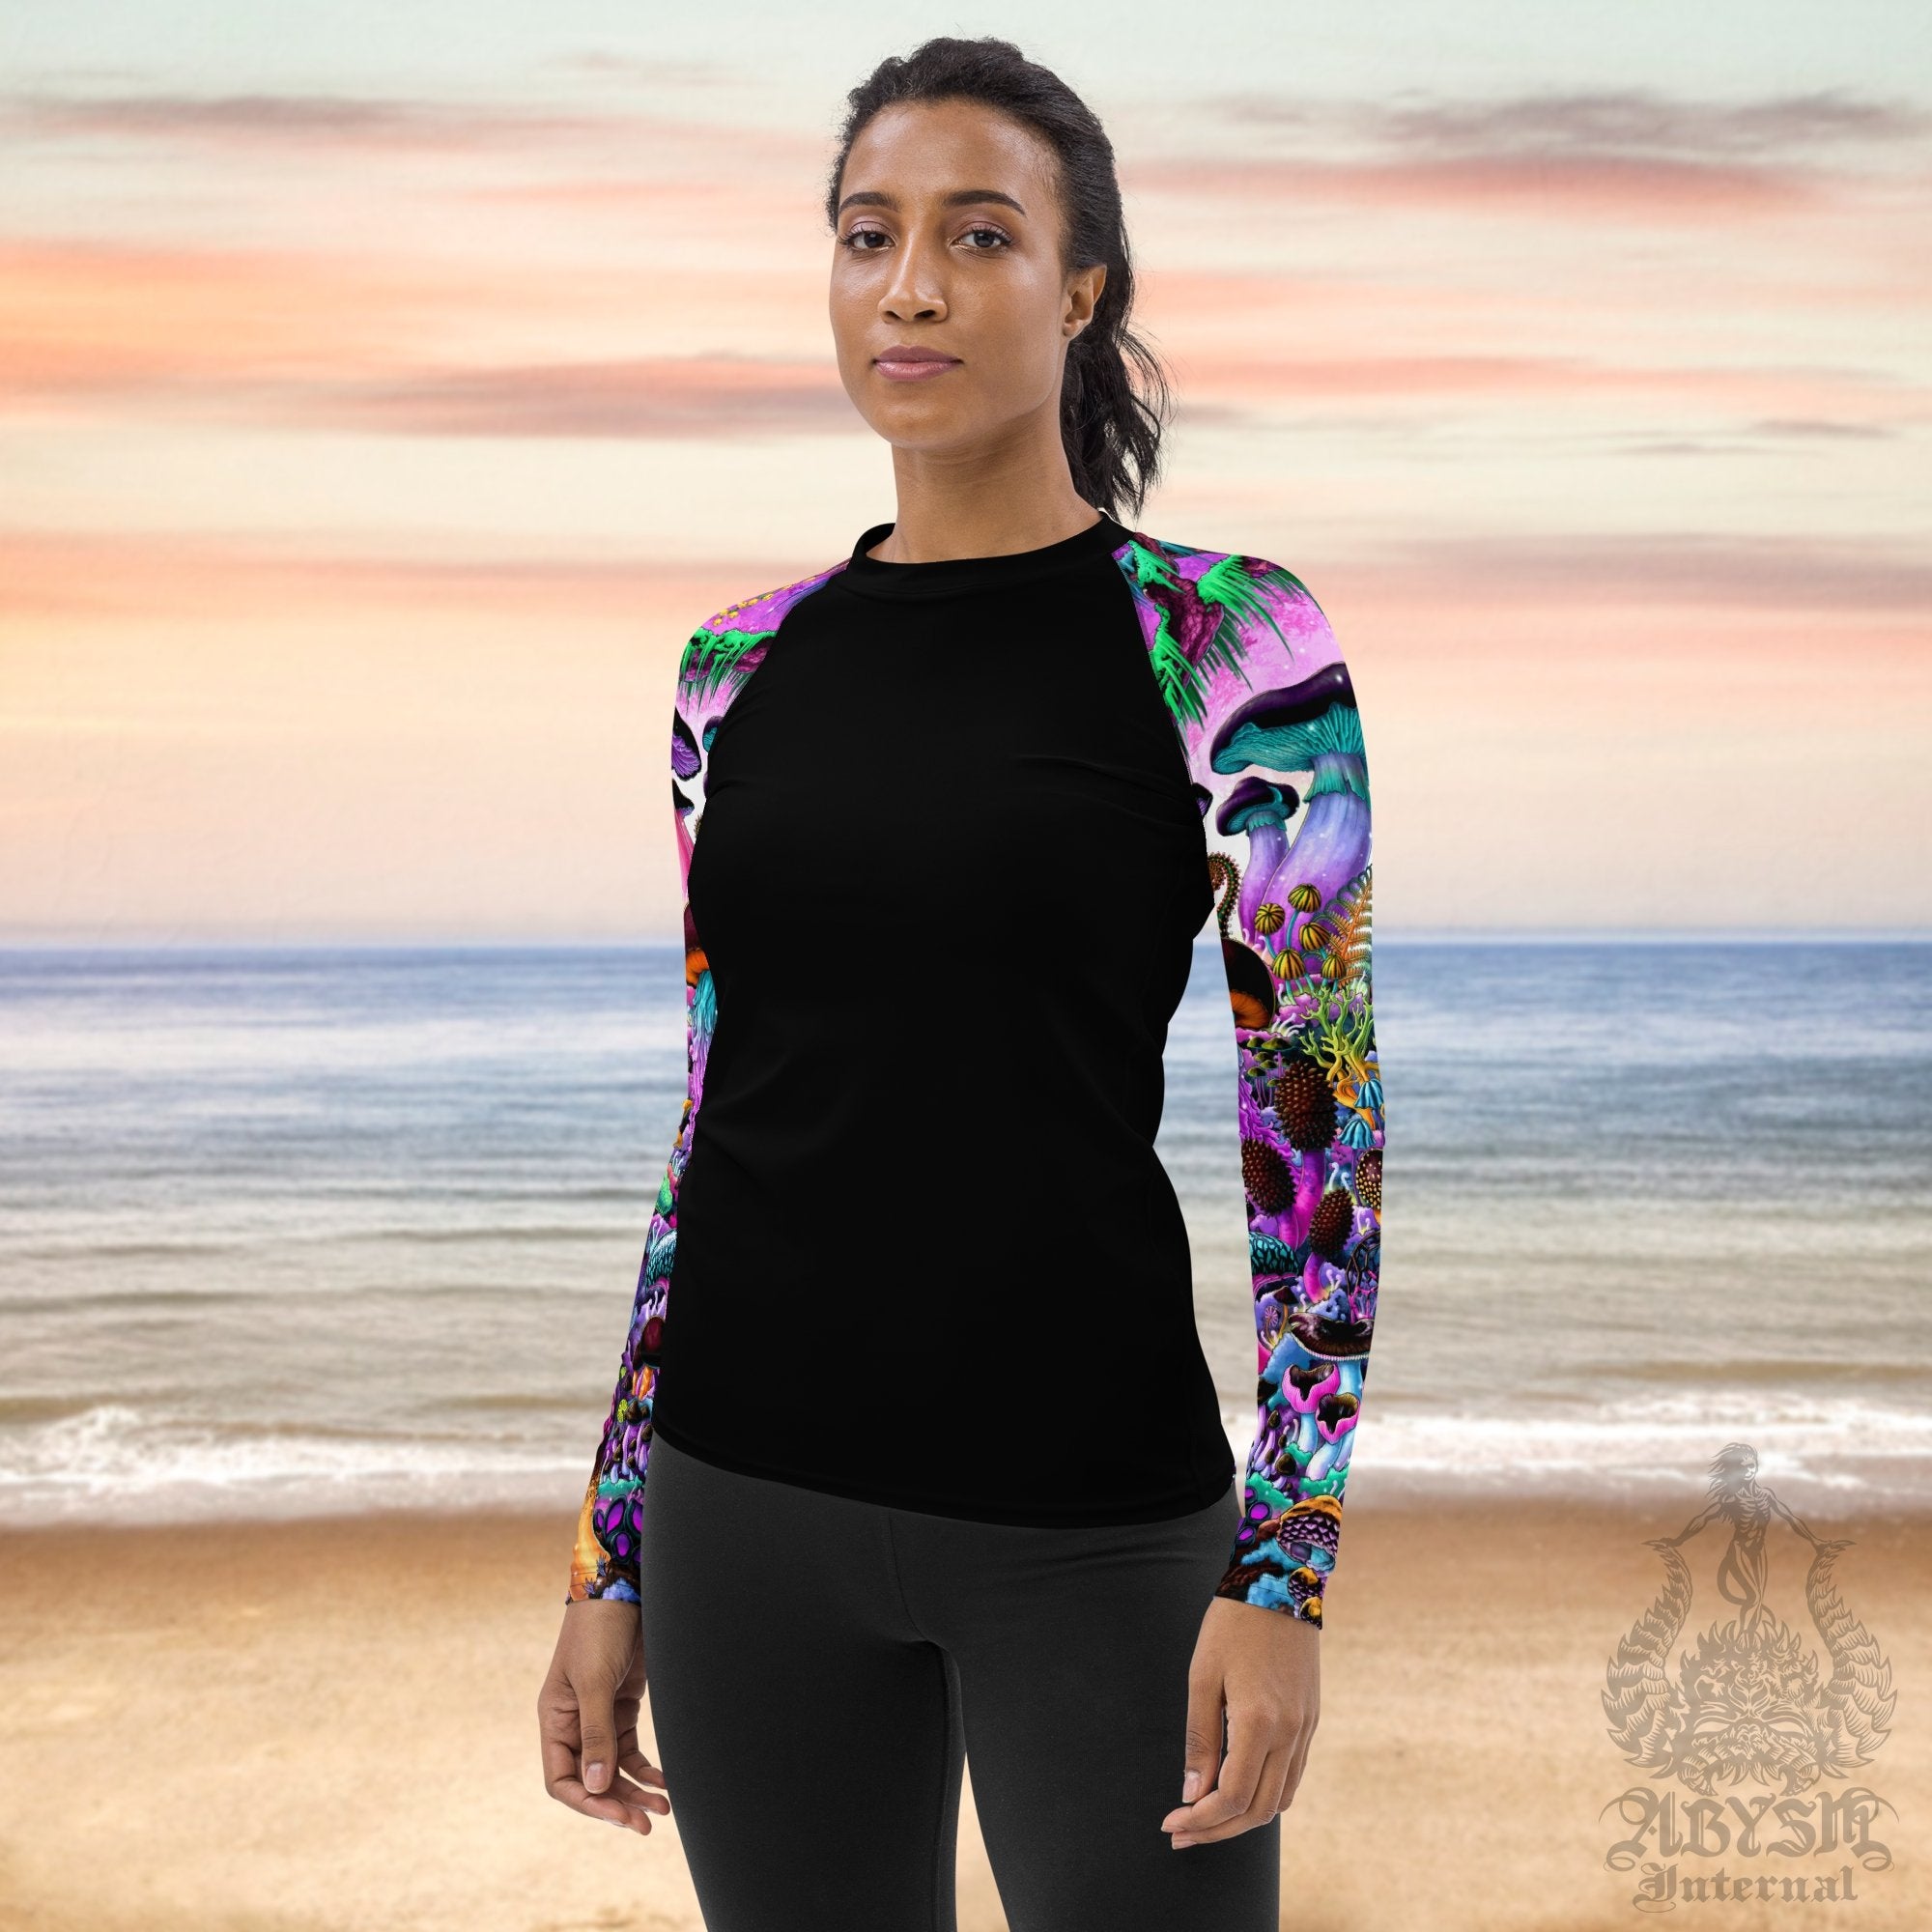 Mushrooms Sleeves Women's Rash Guard, Pastel and Black Long Sleeve spandex  shirt for surfing, swimsuit top for water sports, Fantasy Art - Magic  Shrooms